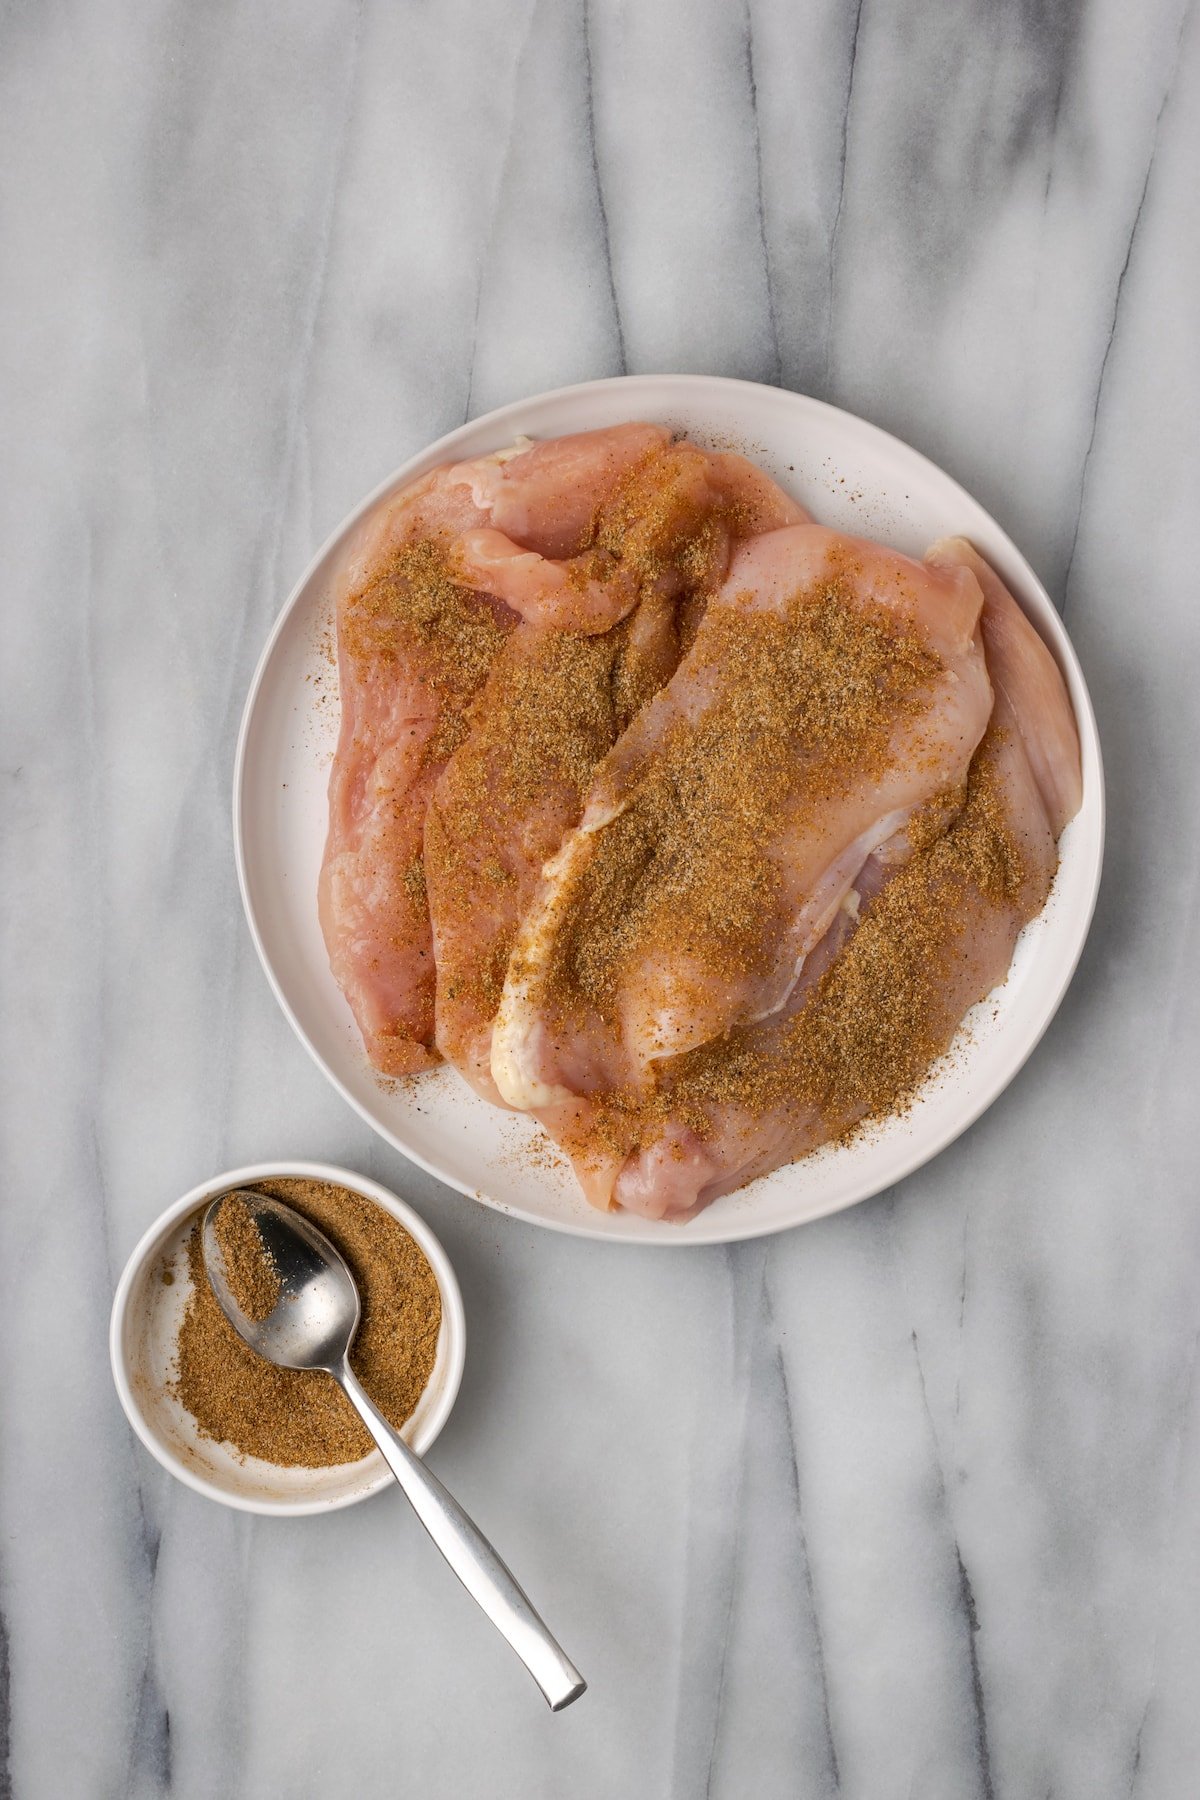 Overhead view of four seasoned, raw chicken breasts on a plate, next to a bowl of spice rub with a spoon in it